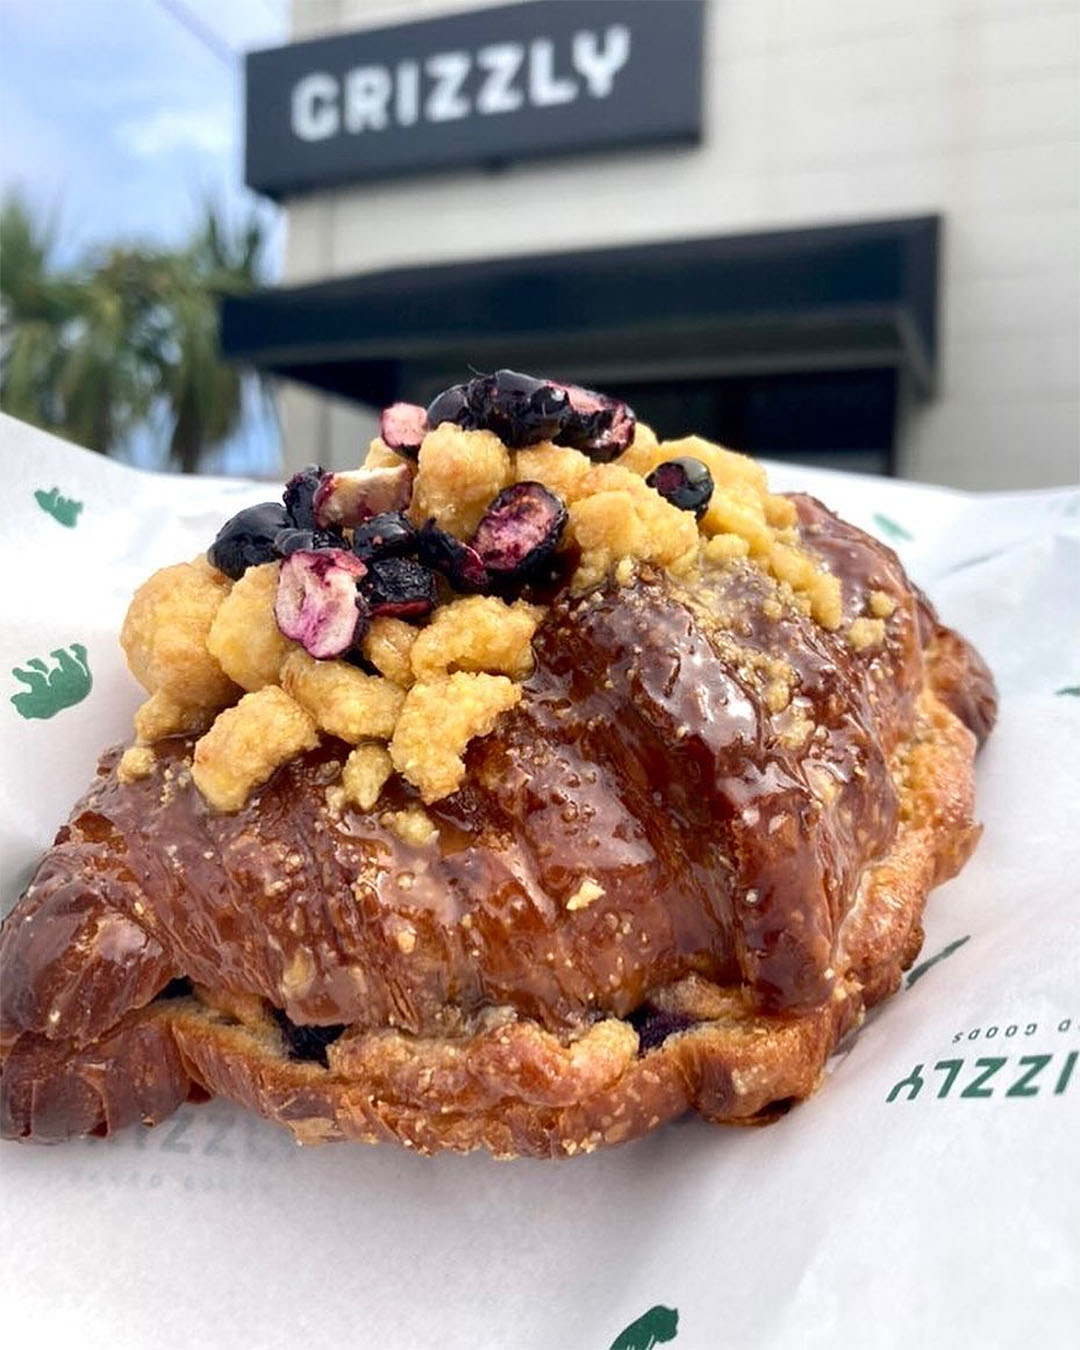 The the Blueberry Cornmeal Crunch.  Filled with a cornmeal and honey frangipane with blueberries, covered in a honey butter glaze topped with freeze dried blueberries from Grizzly.